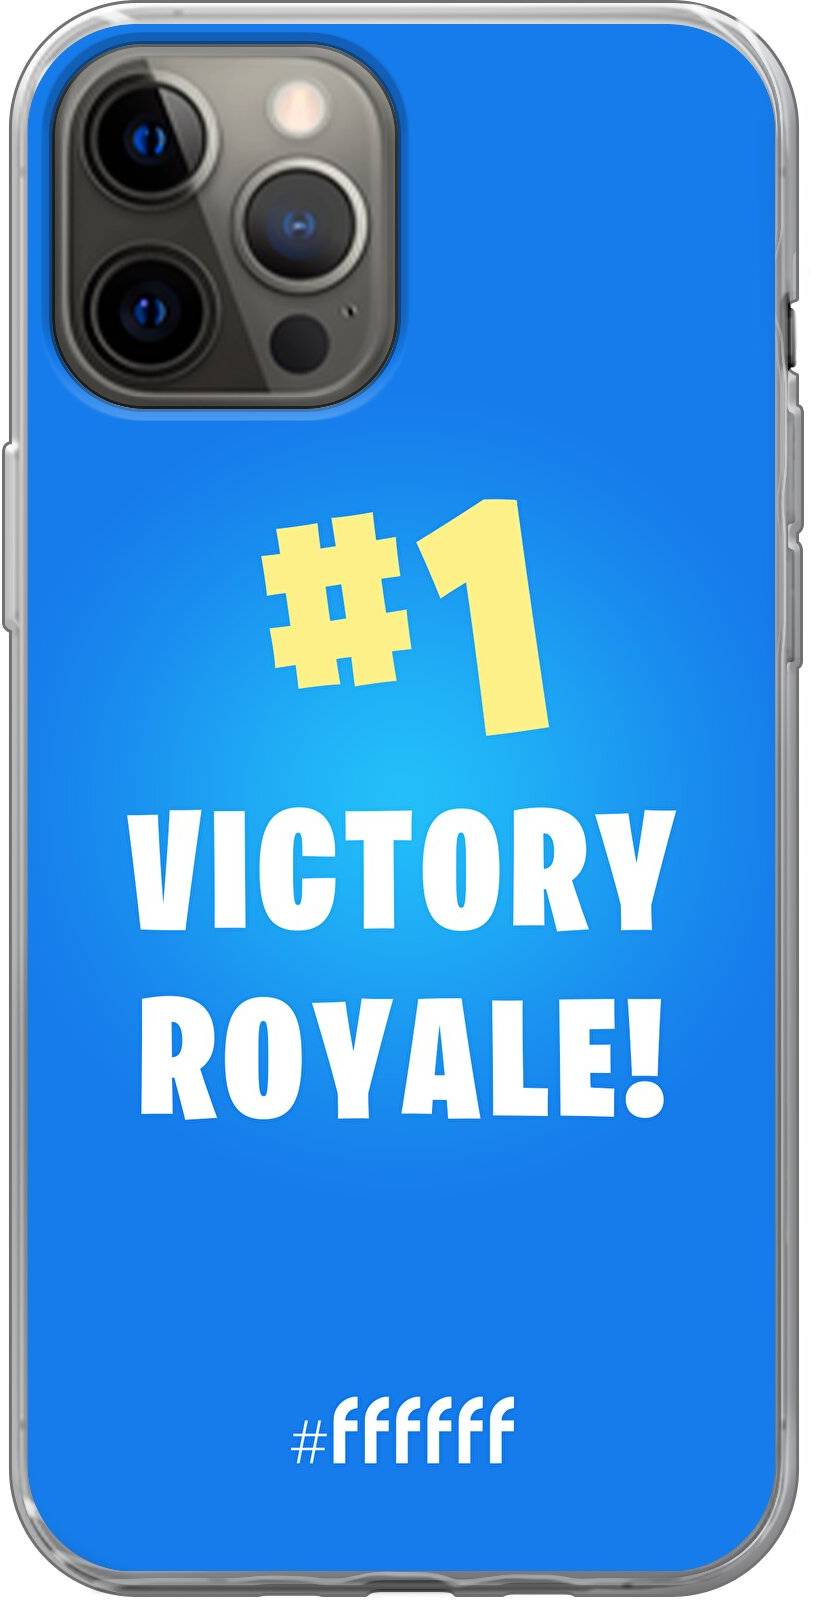 Battle Royale - Victory Royale iPhone 12 Pro Max